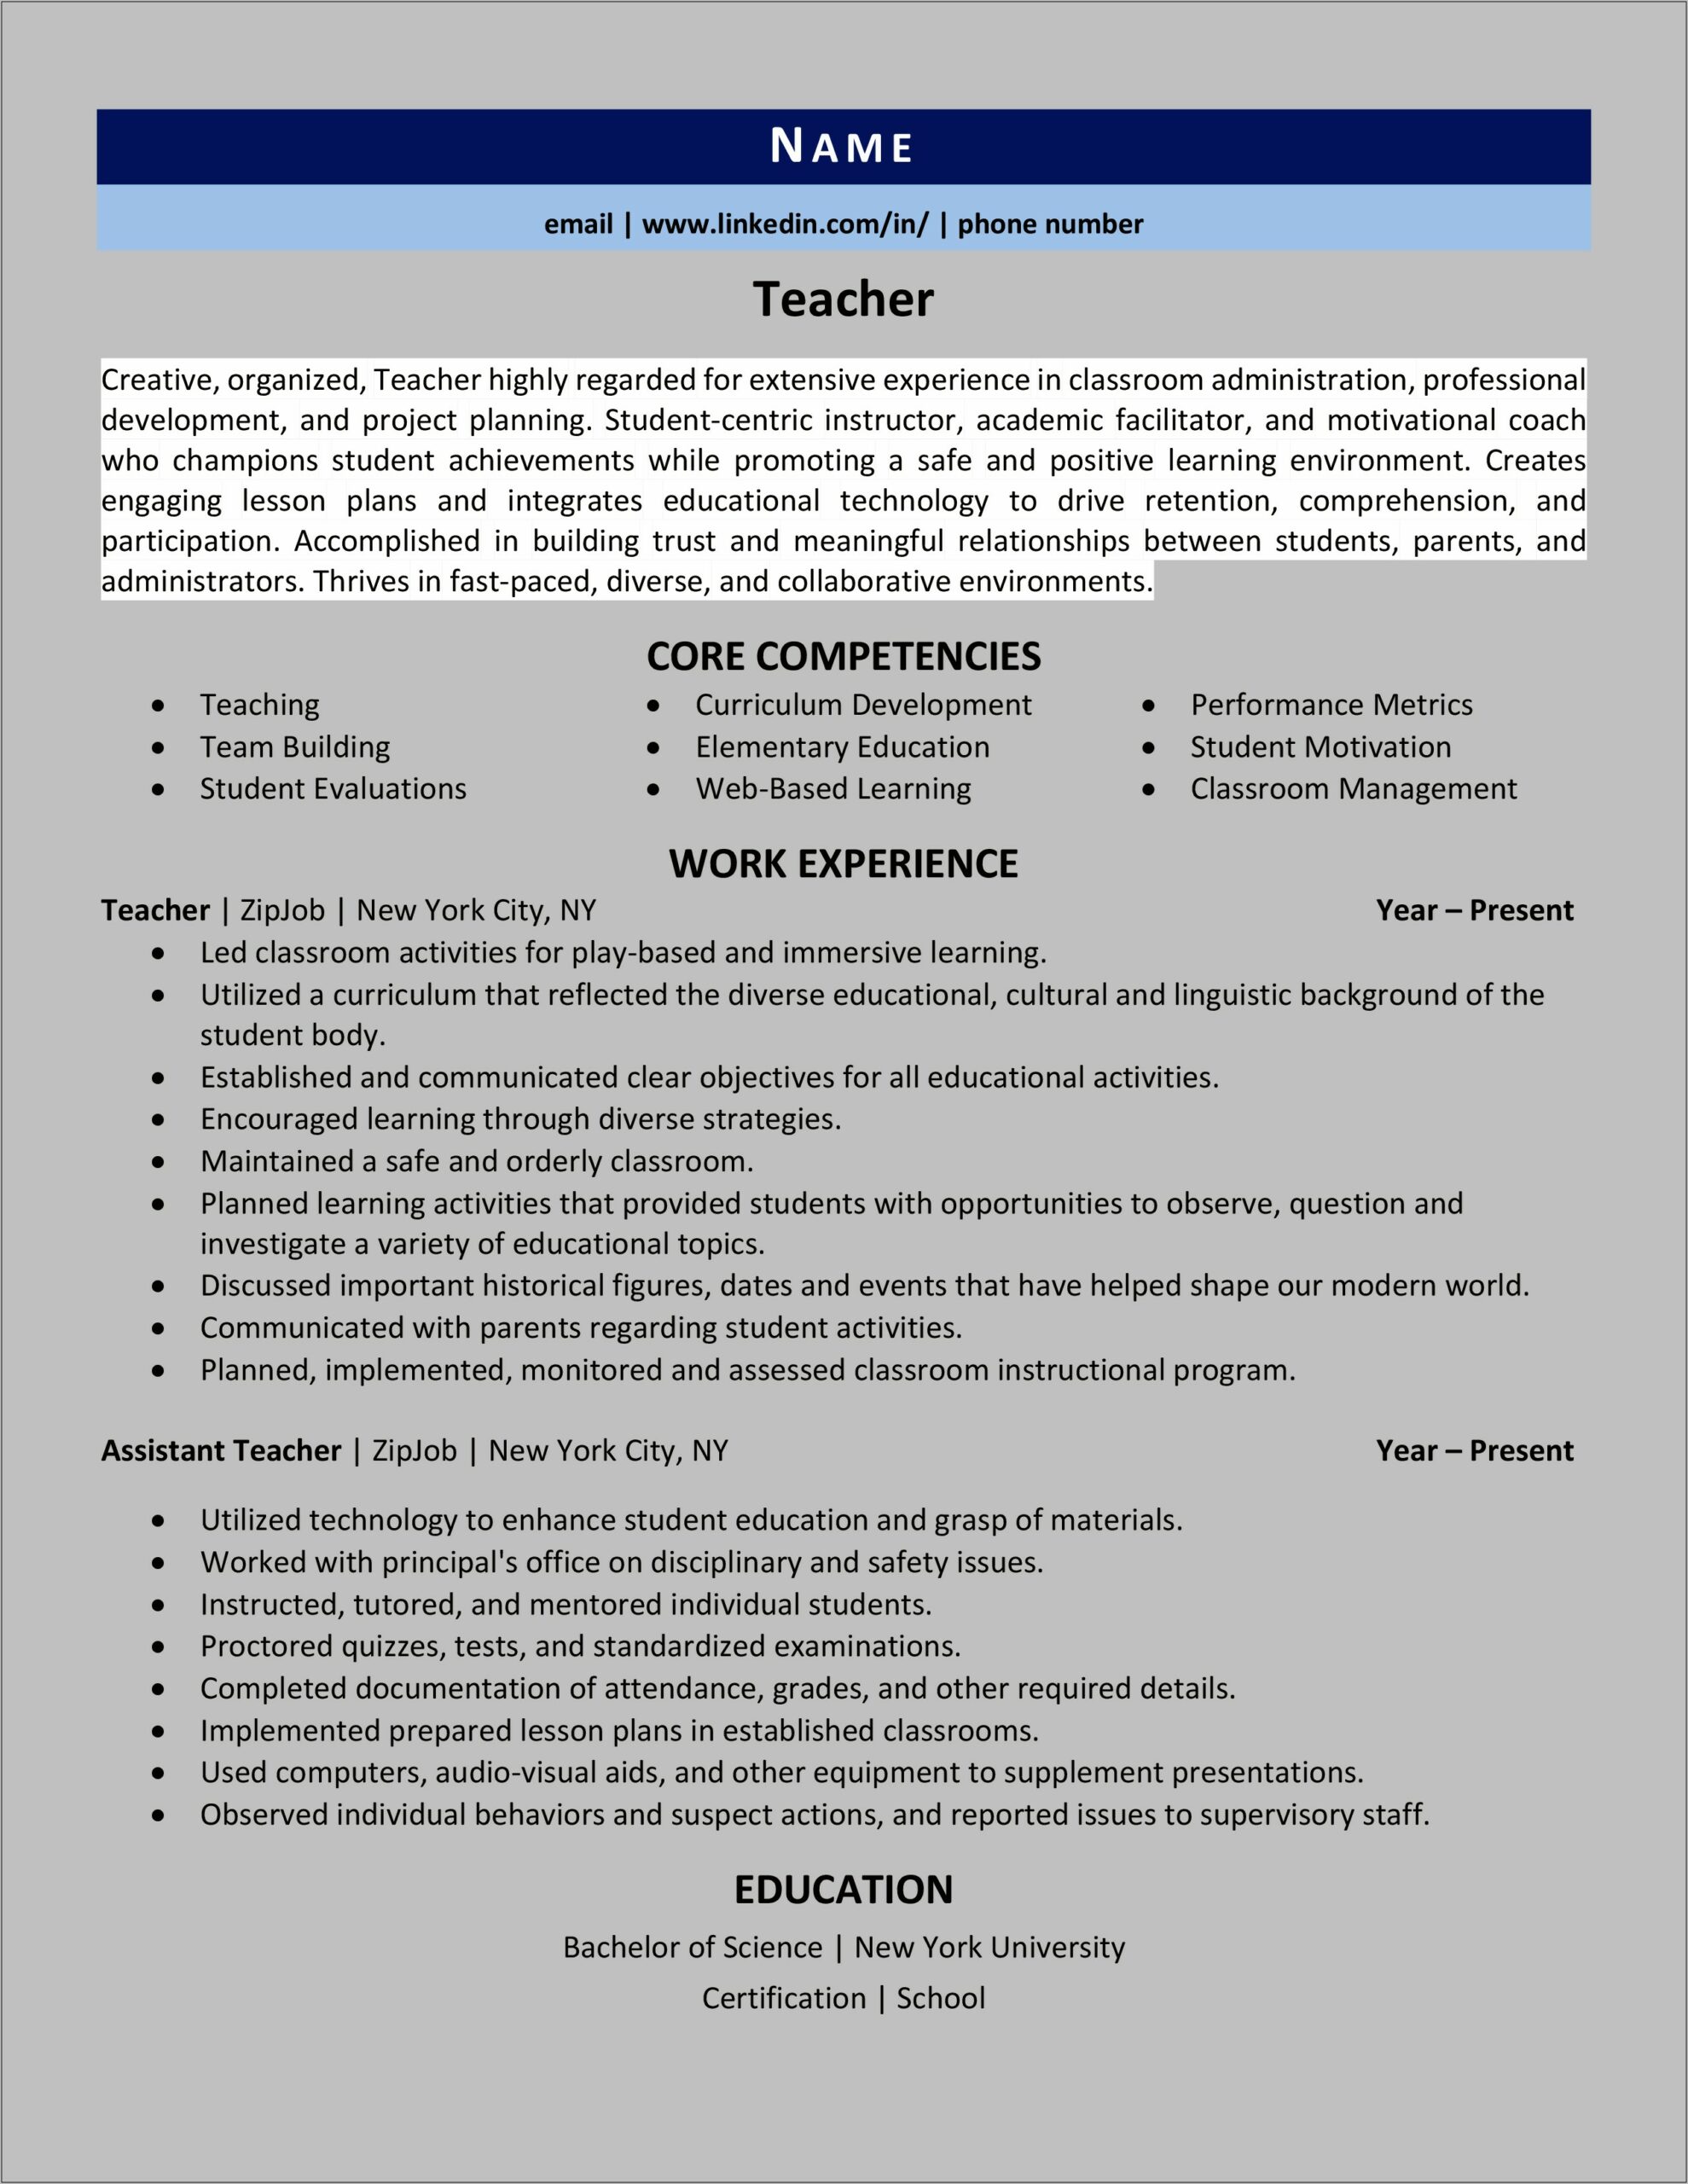 Assistant Teacher Skills And Abilities Resume